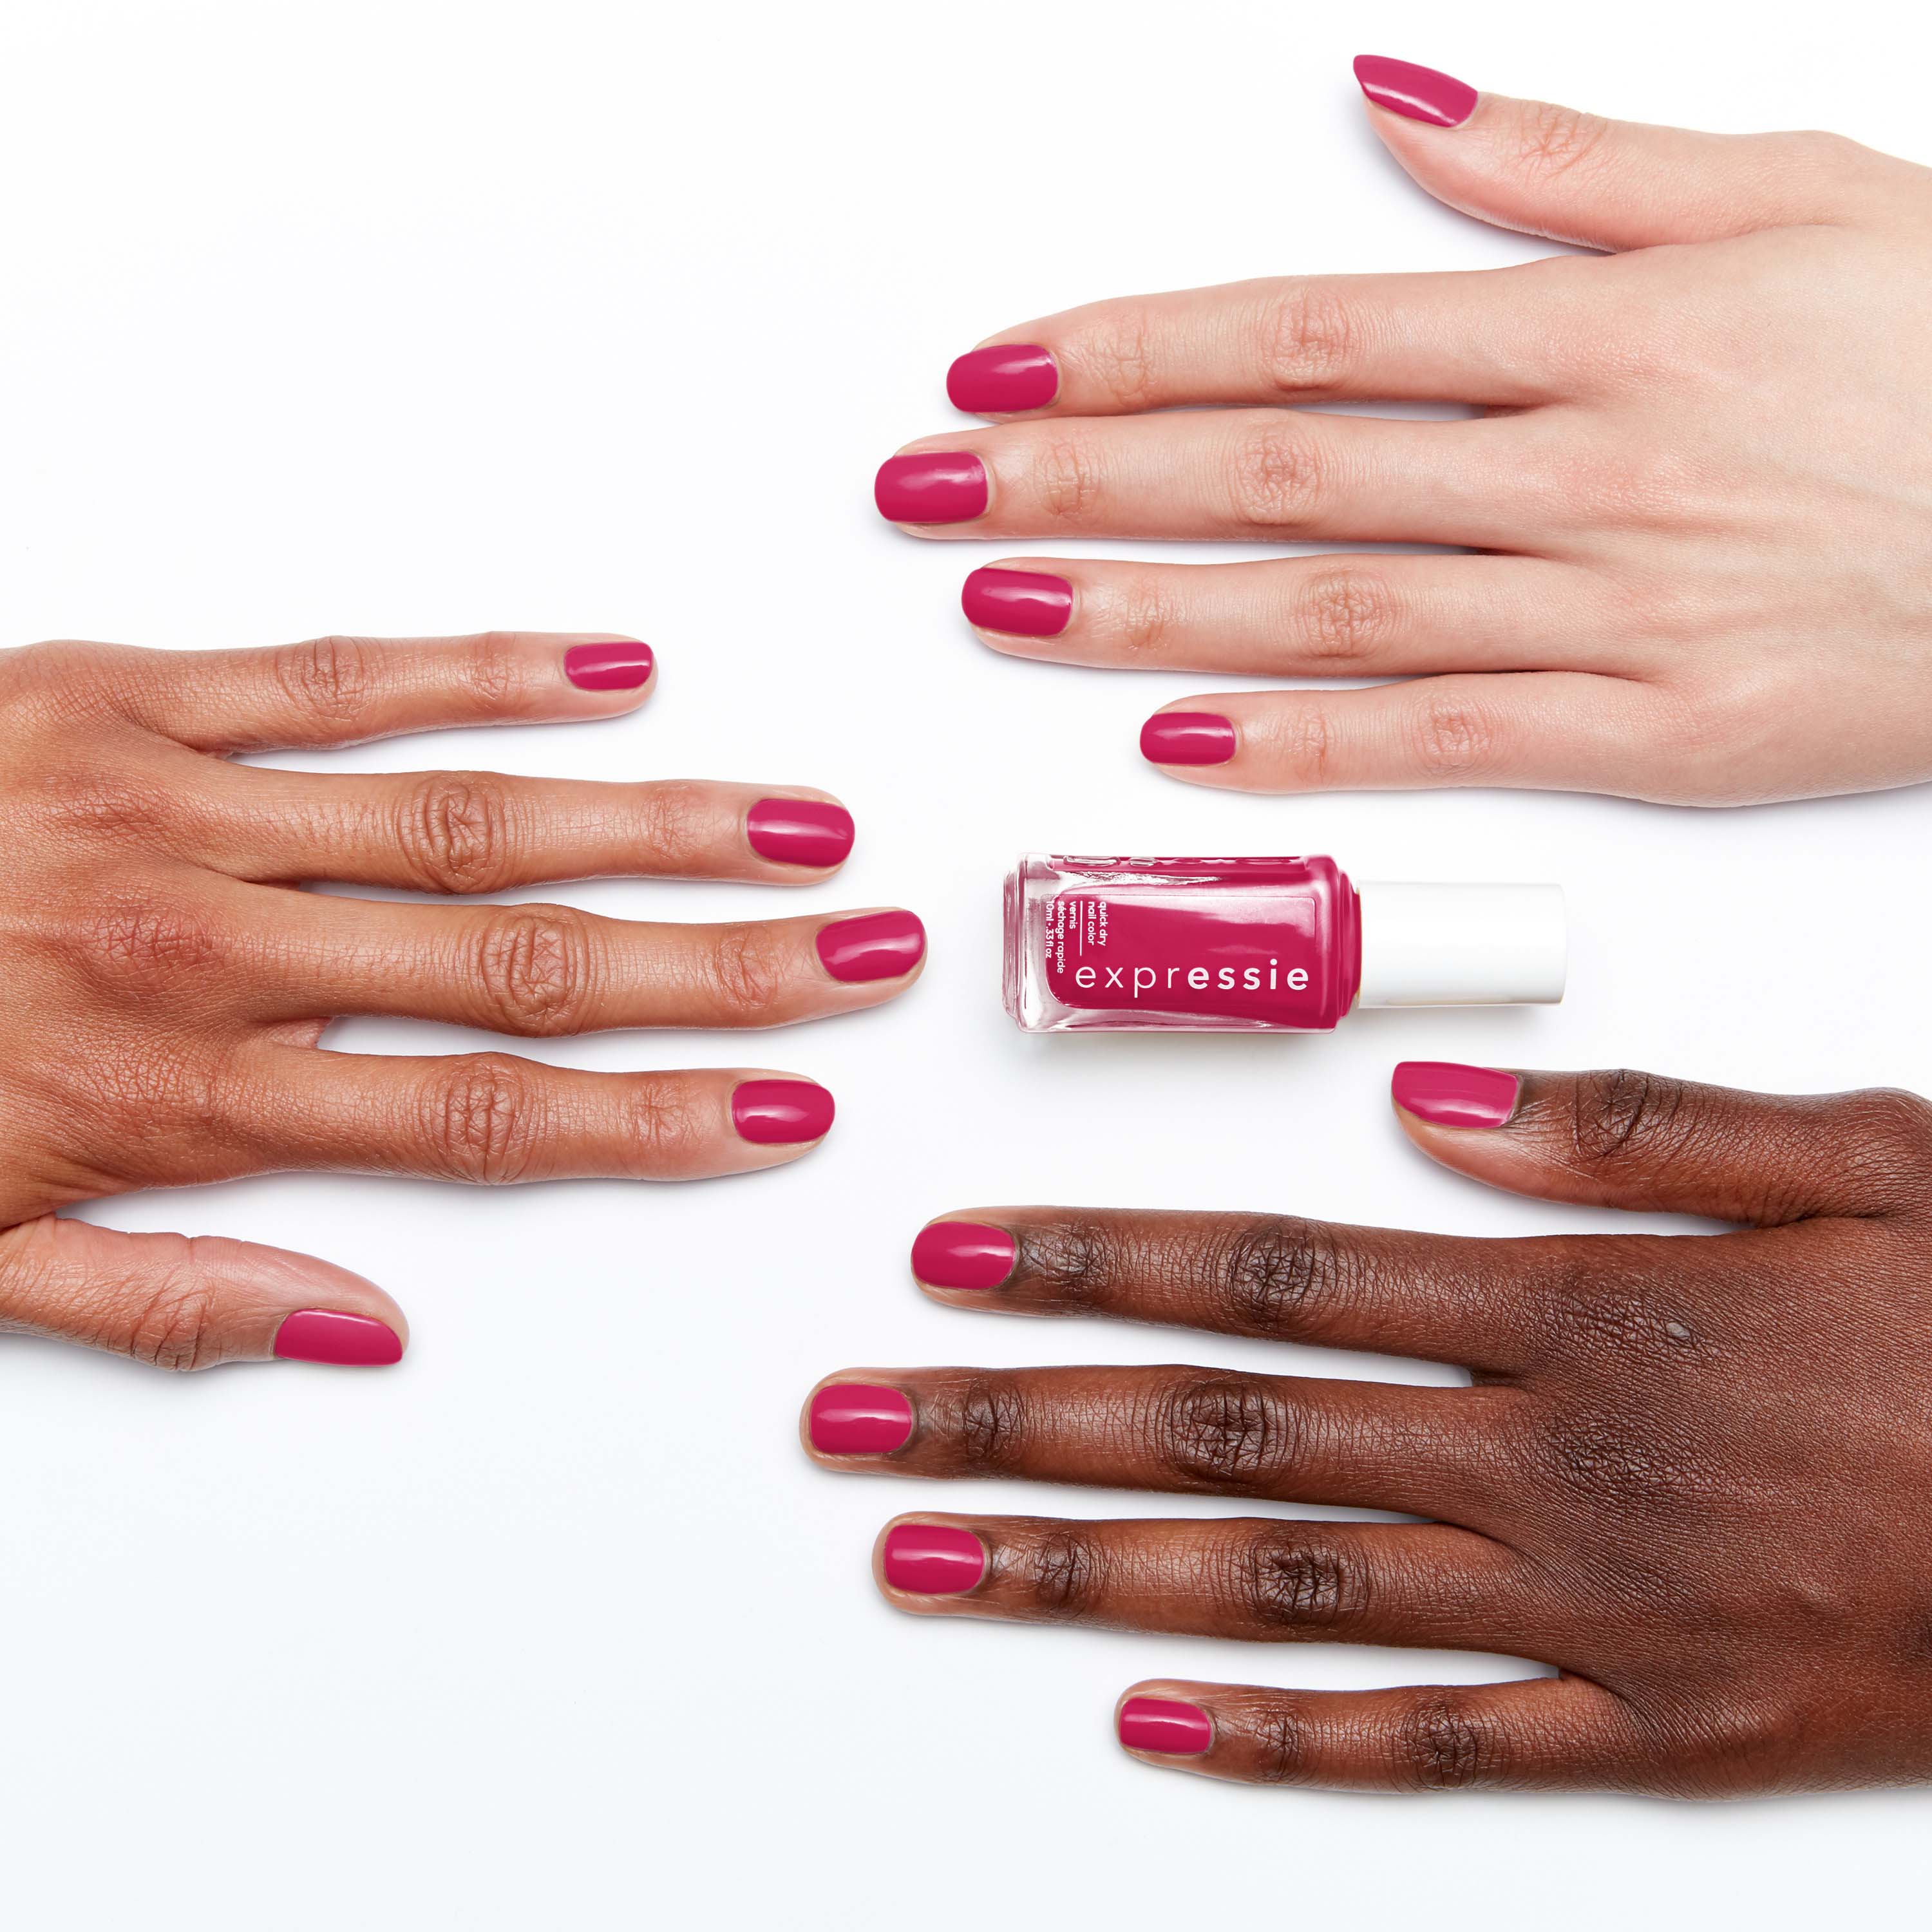 Essie LOVE 90 by Spark Am Essie Nail I Color 80% Plant-based The